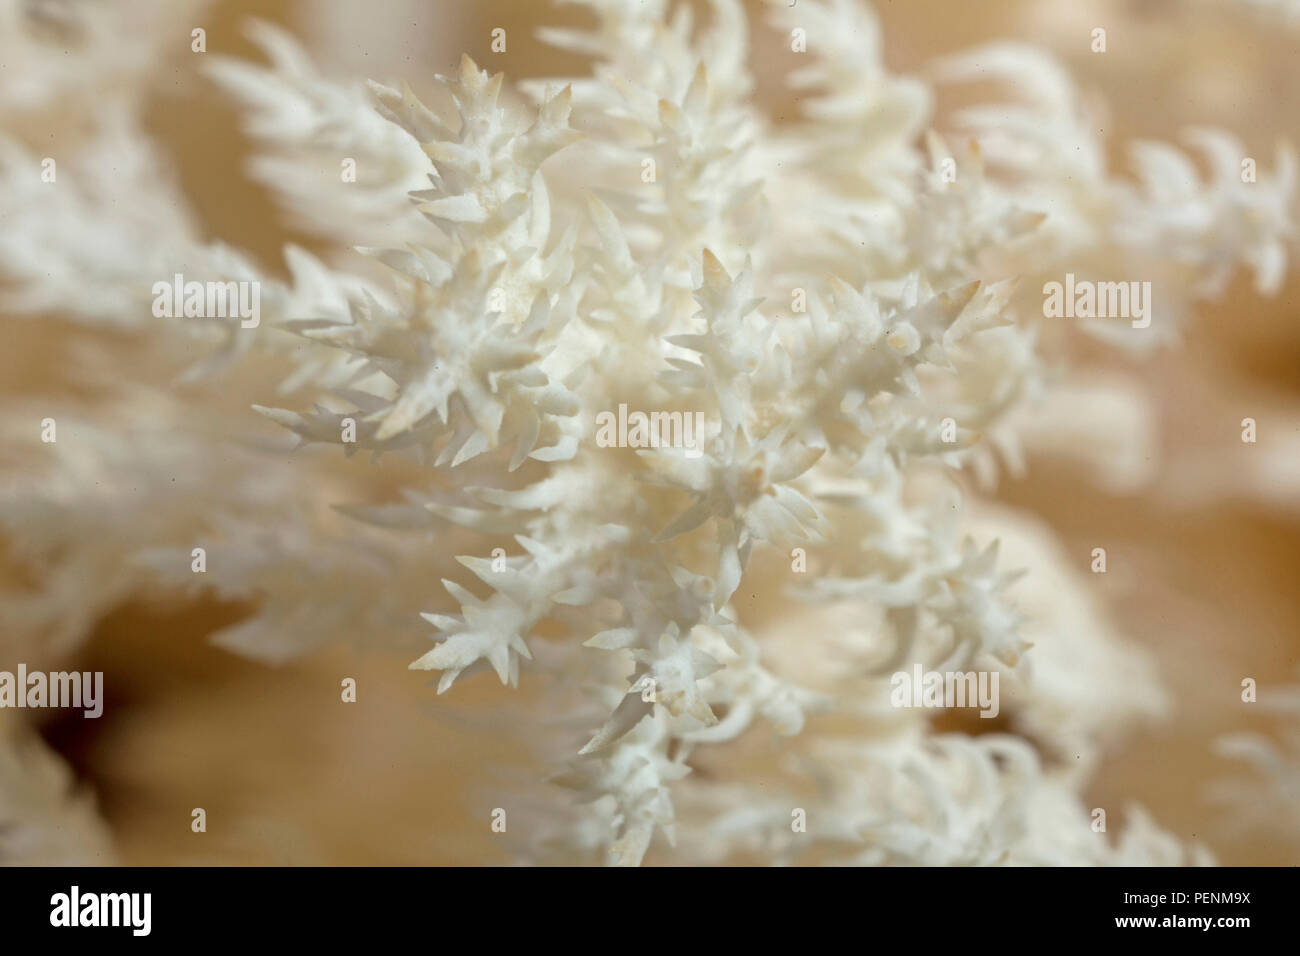 Coral Tooth Fungus, (Hericium coralloides) Stock Photo